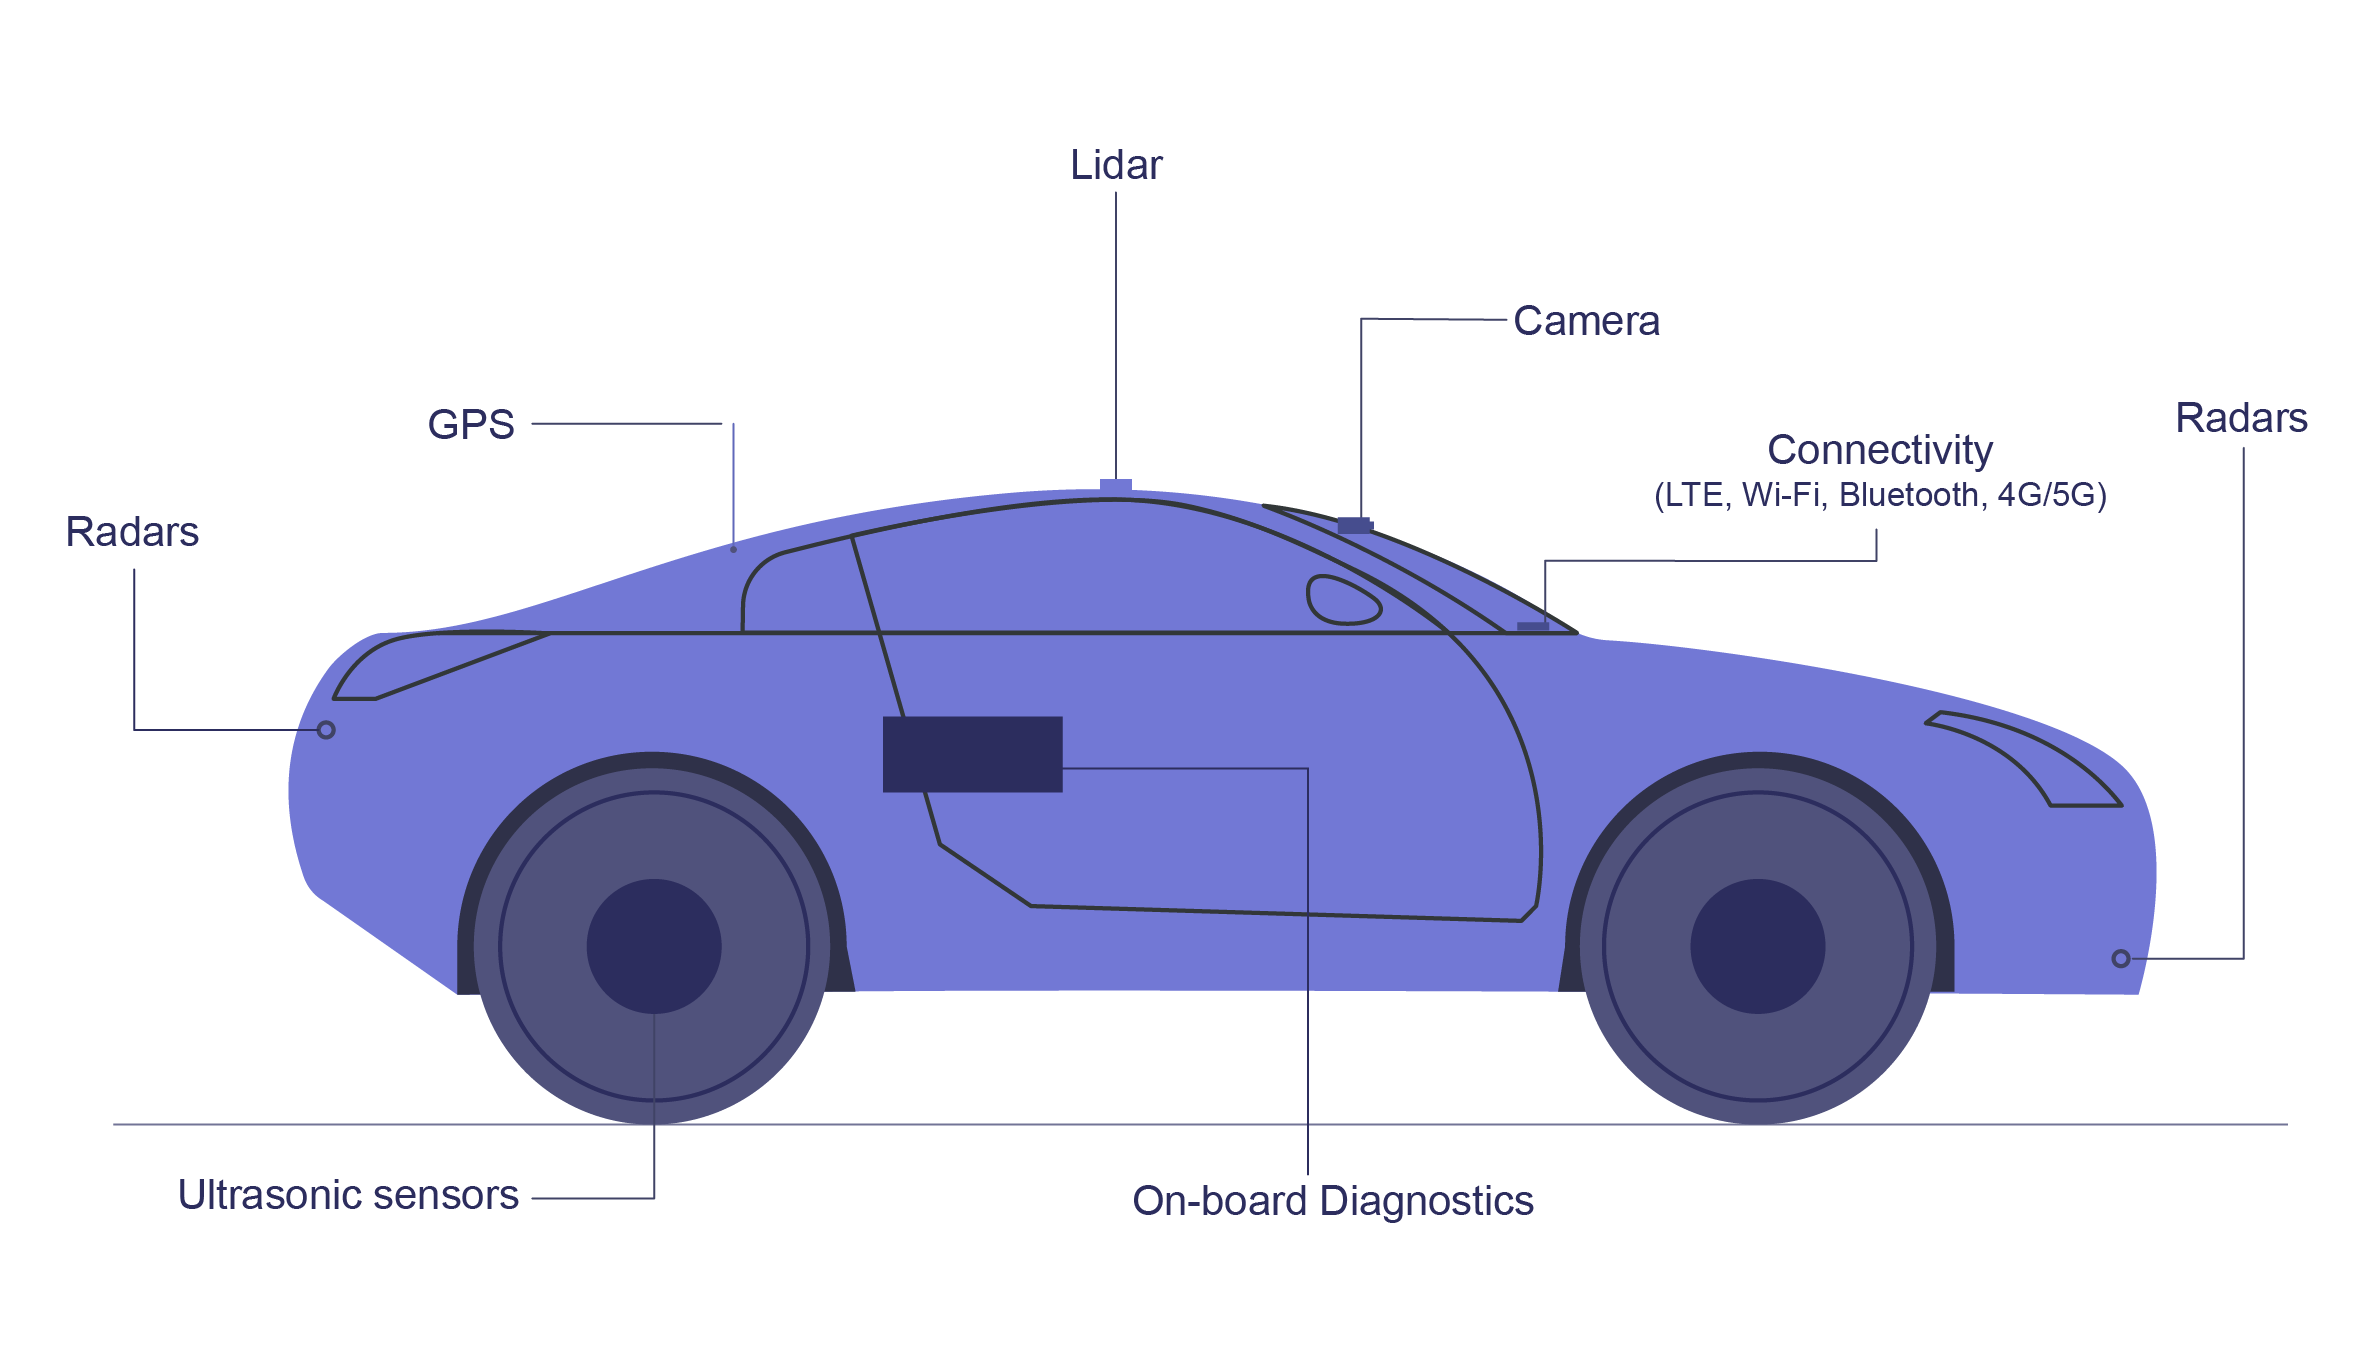 Most common components of the IoT vehicles